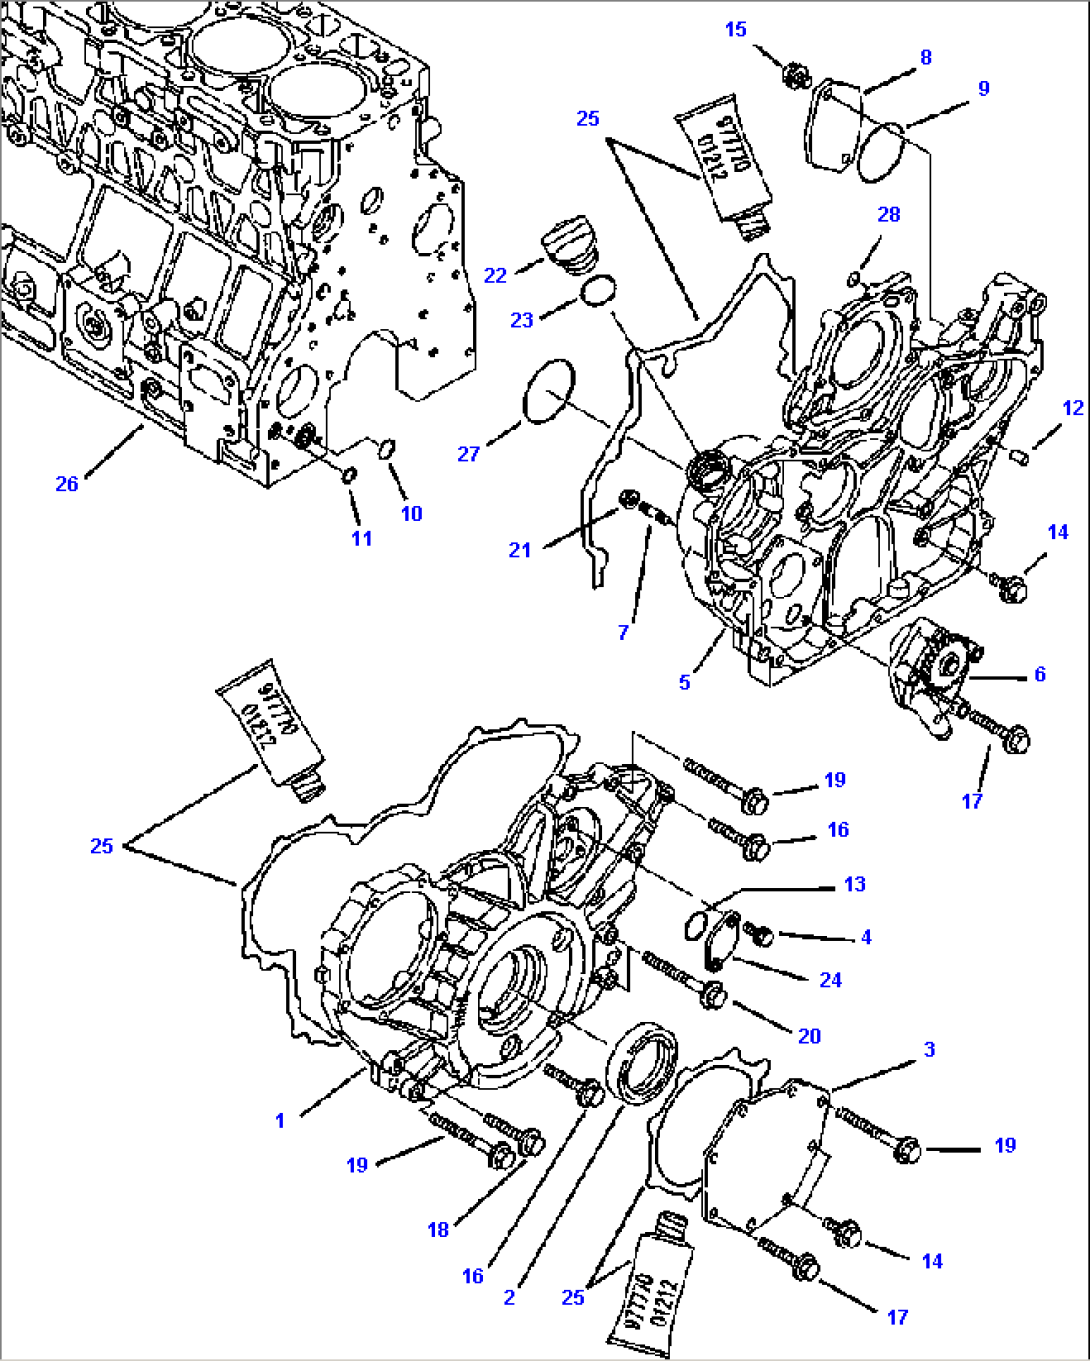 FIG. A0111-01A1 TIER II ENGINE - GEAR HOUSING AND OIL PUMP